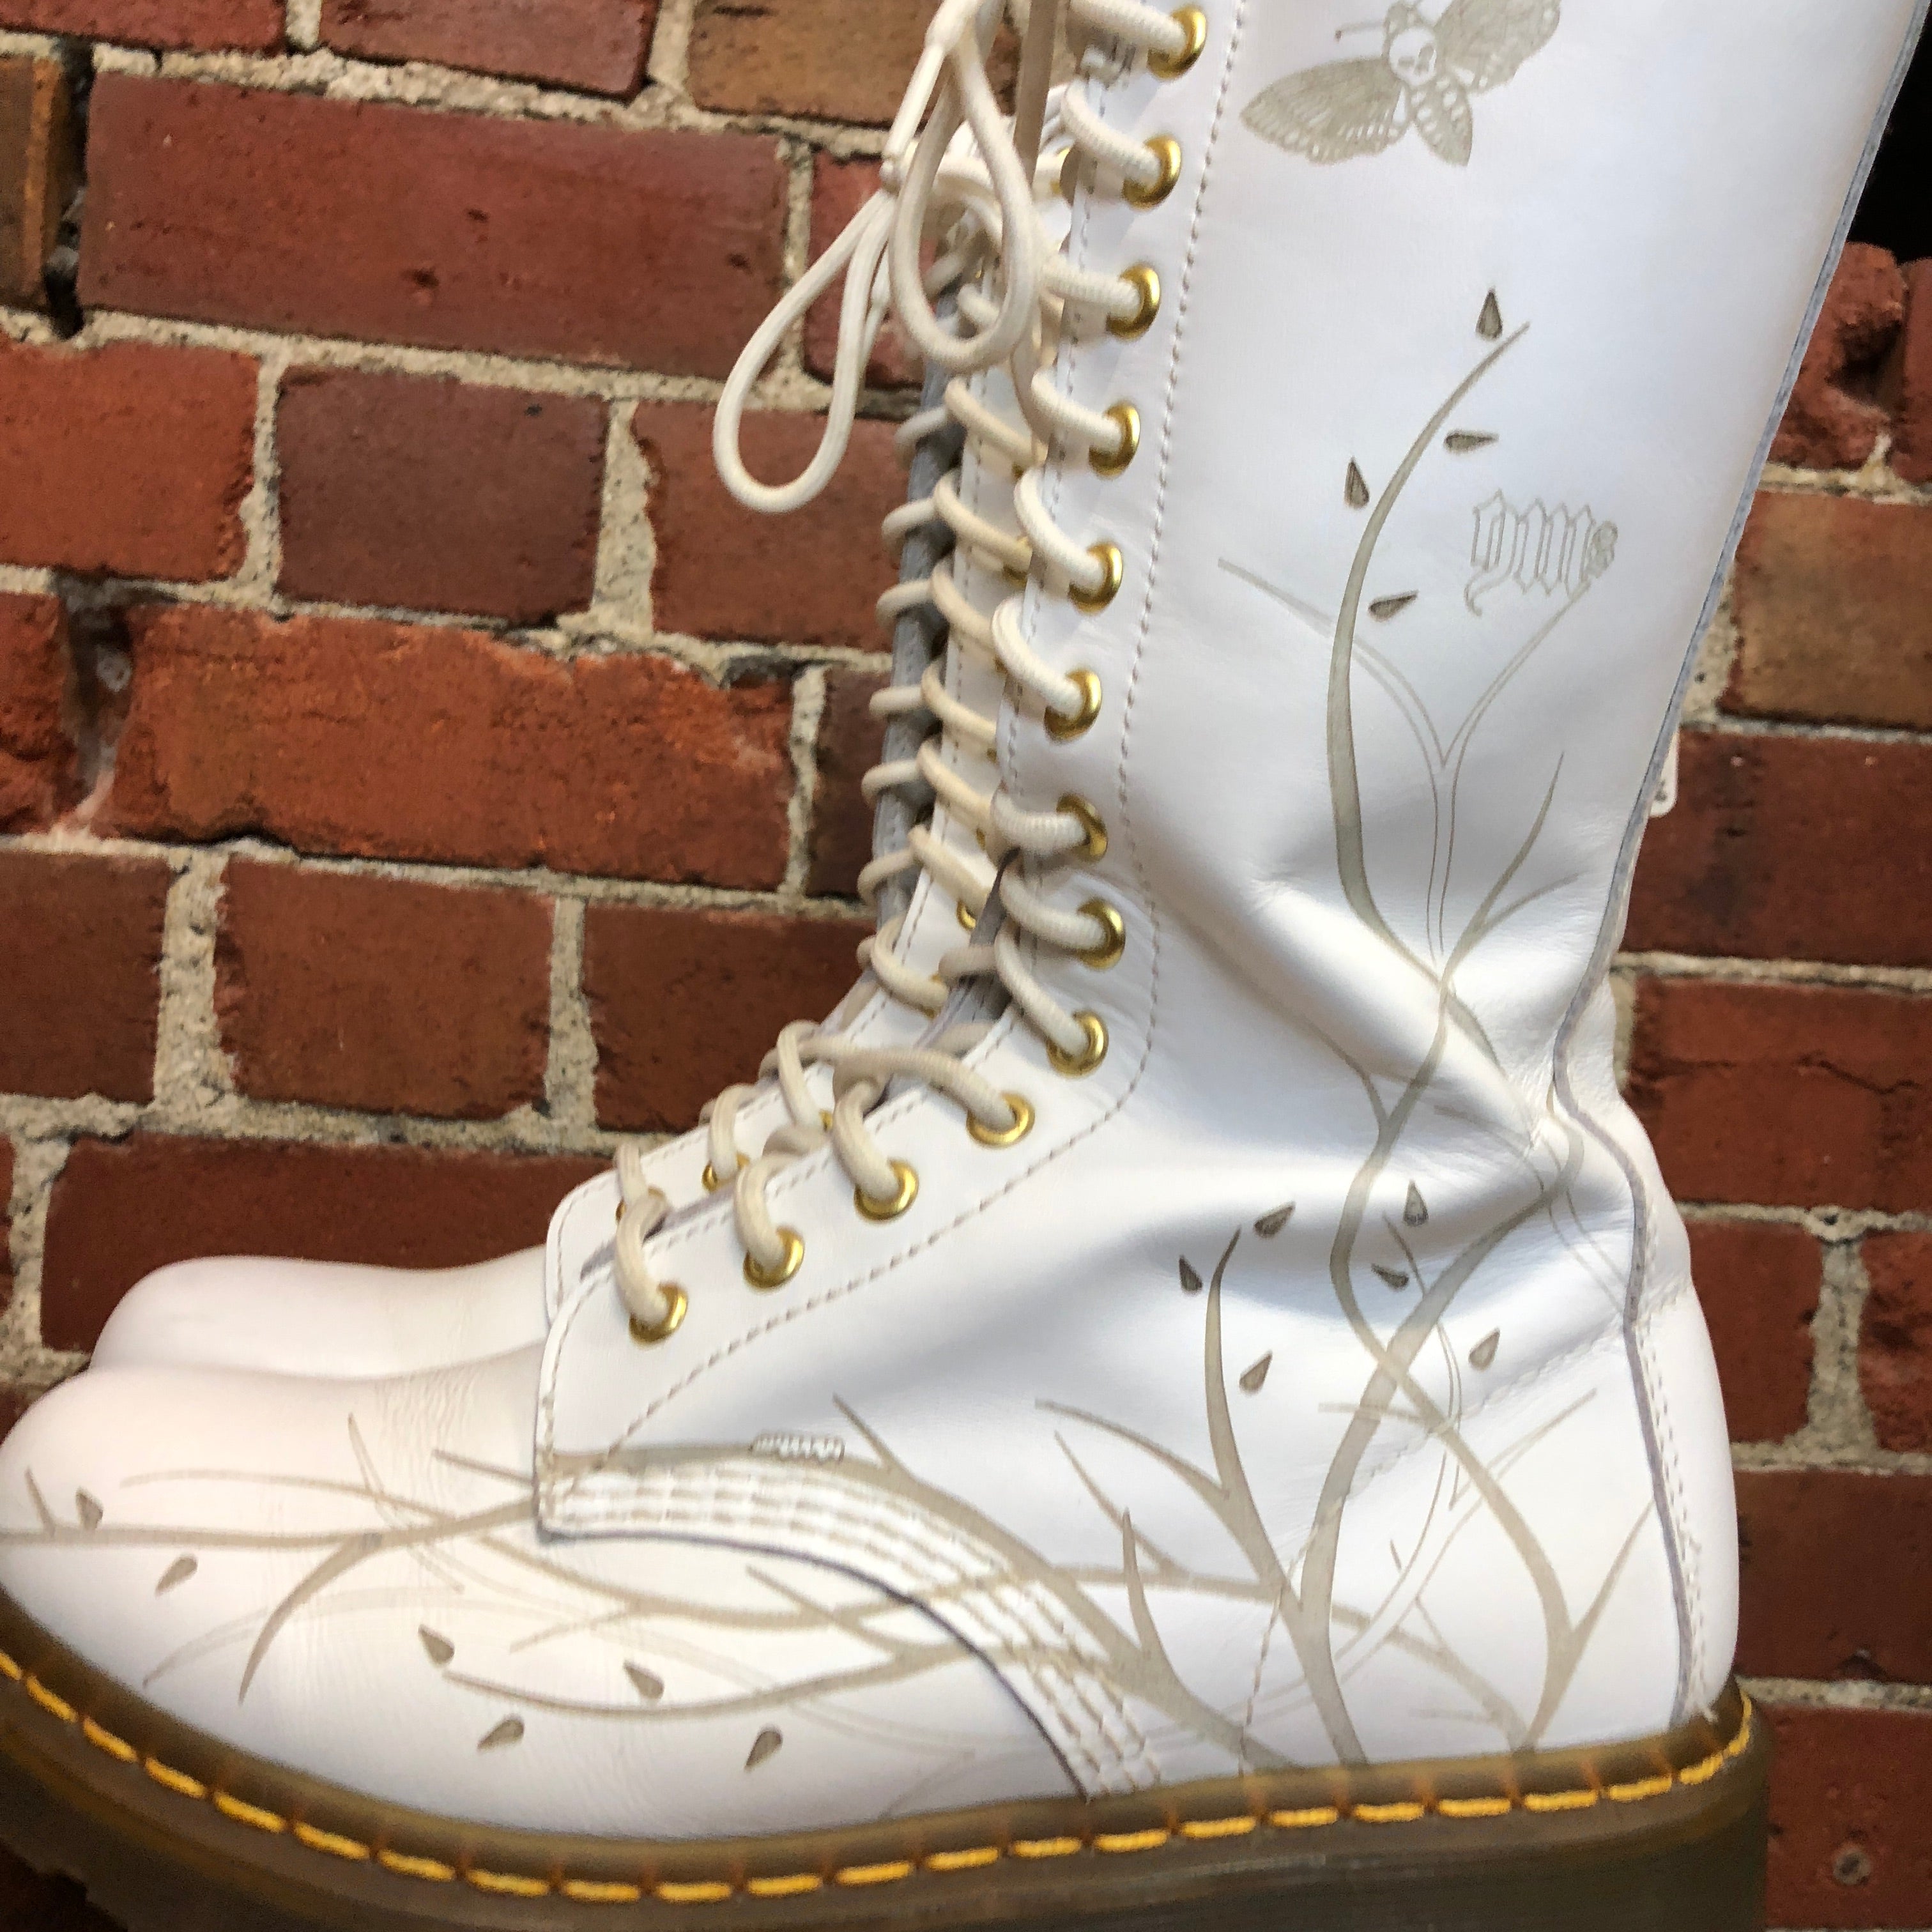 12 up white leather Doc Martens